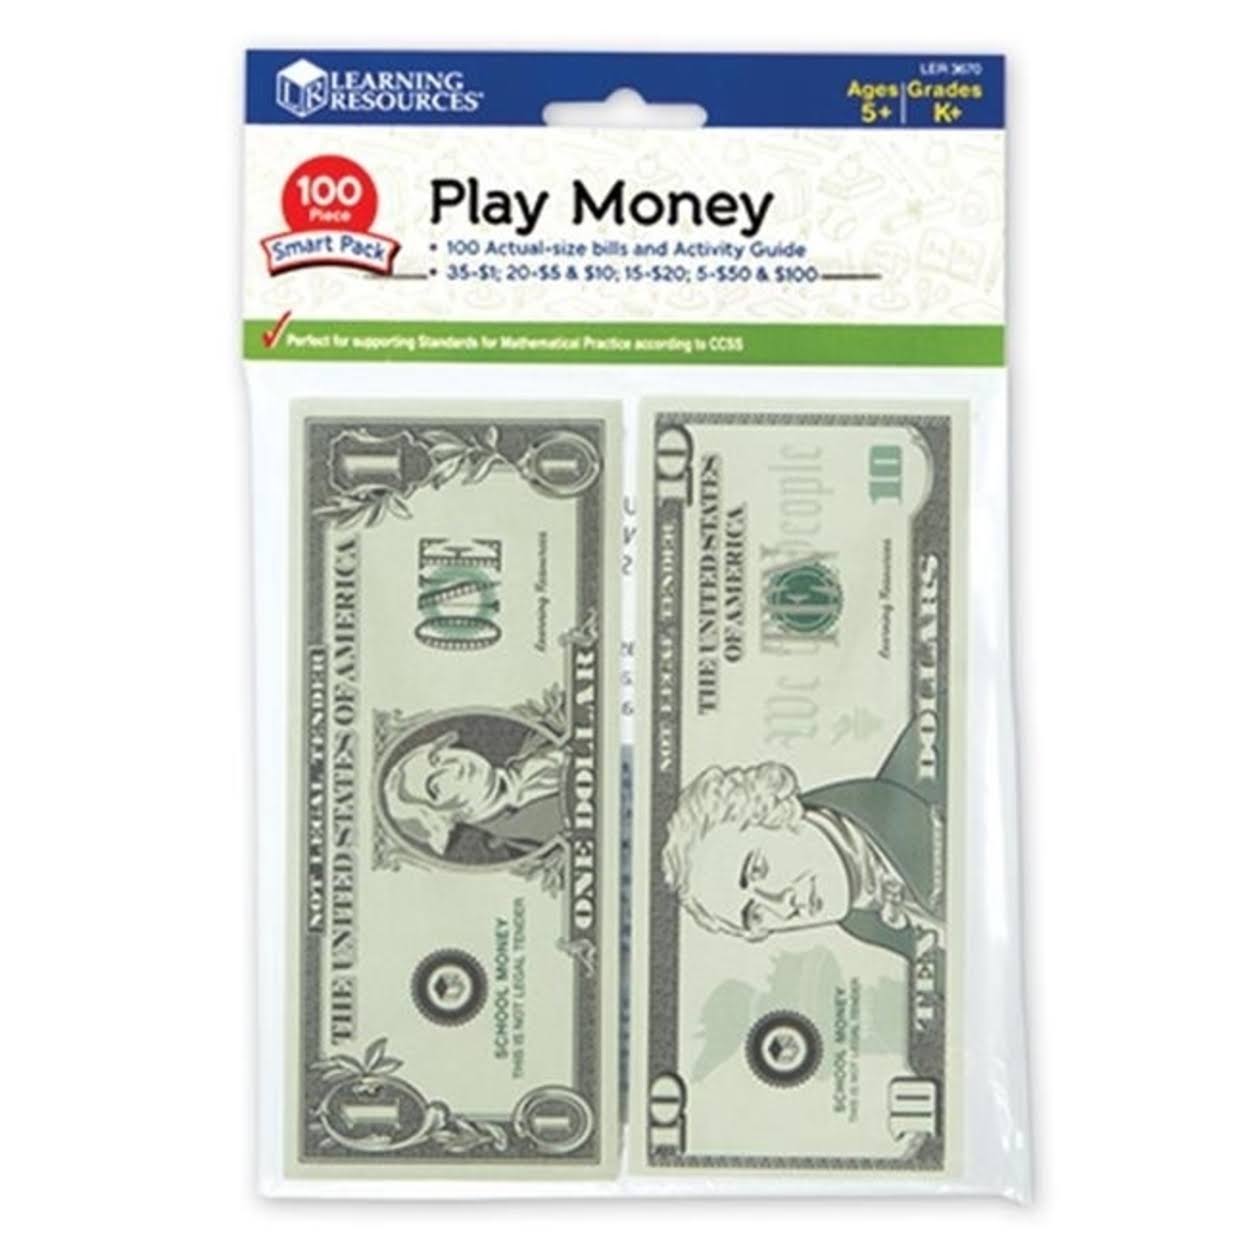 Learning Resources Play Money Smart Pack